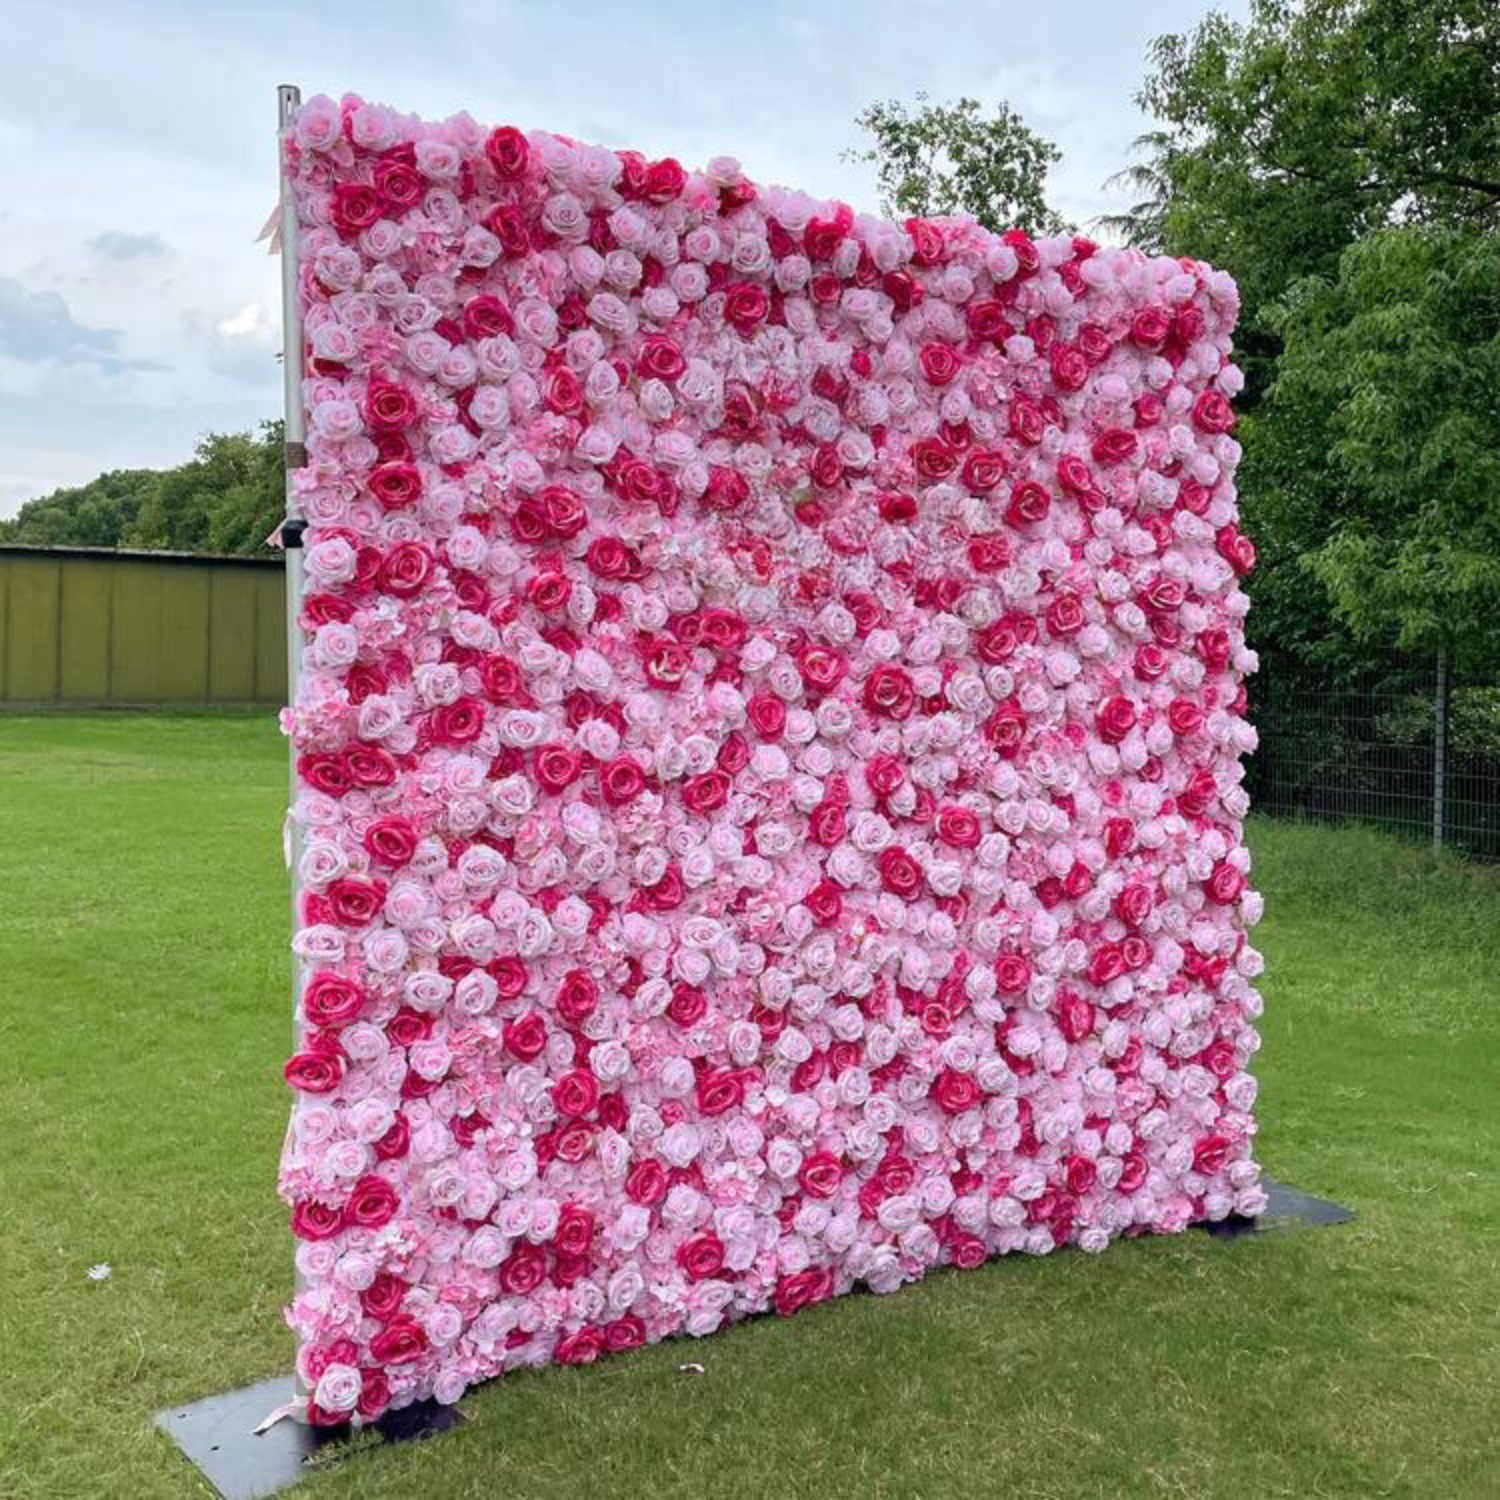 Pink Rose Wall Rental 2- Riverside Flower Wall Rental - Perfect Capture Booth | Photo Booth Rental.png